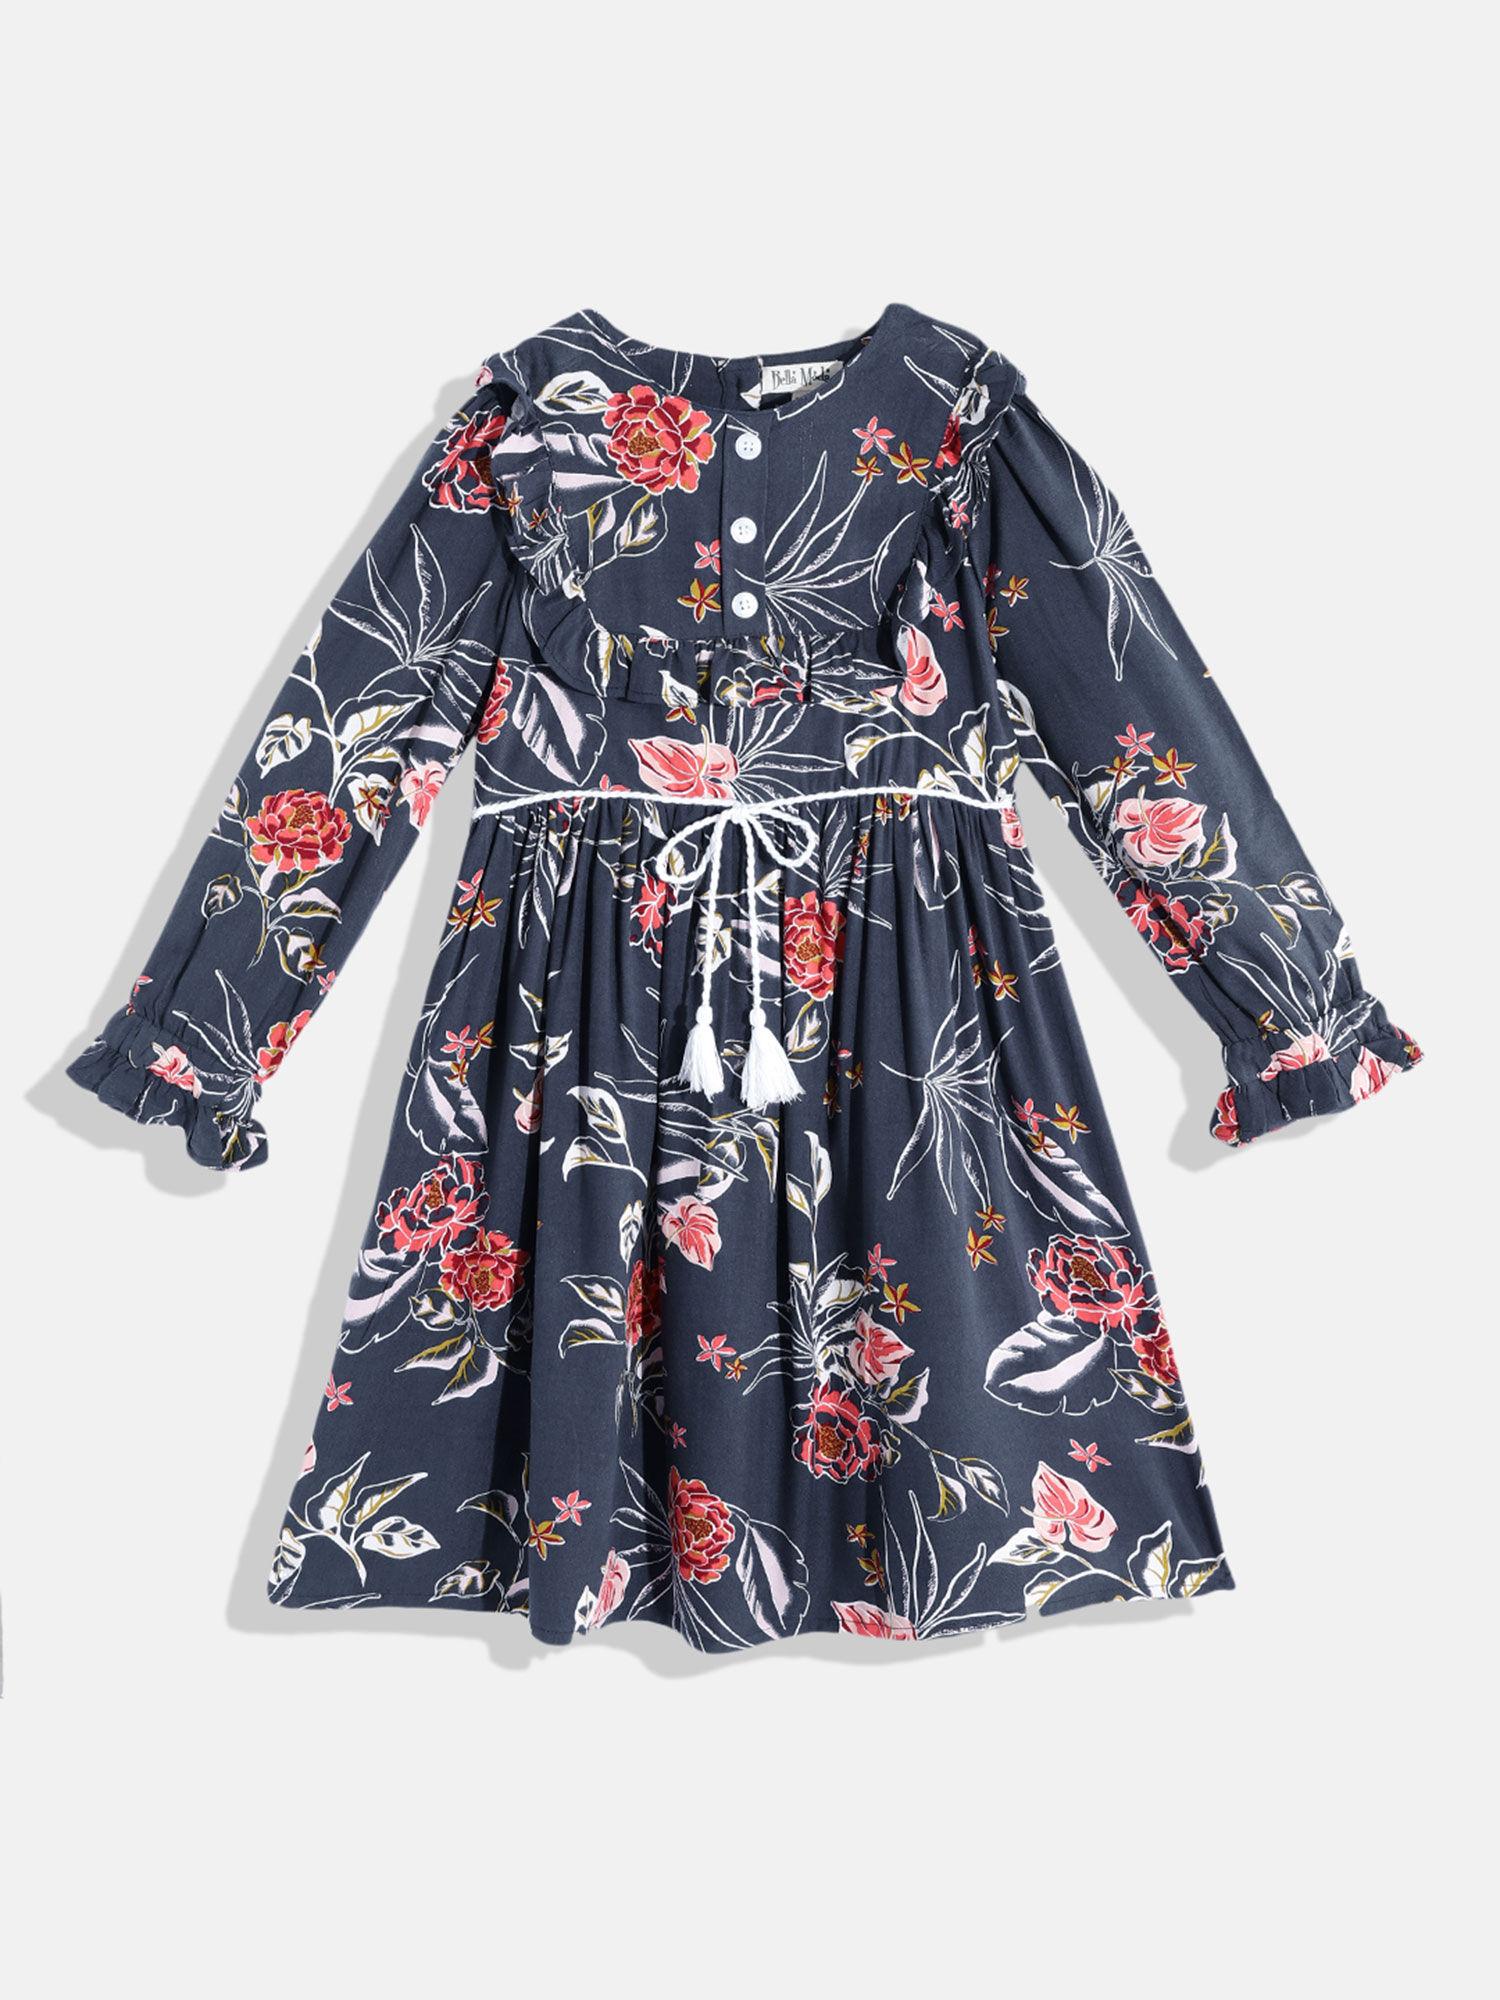 round neck fit & flare casual floral print full sleeve girls dress navy blue